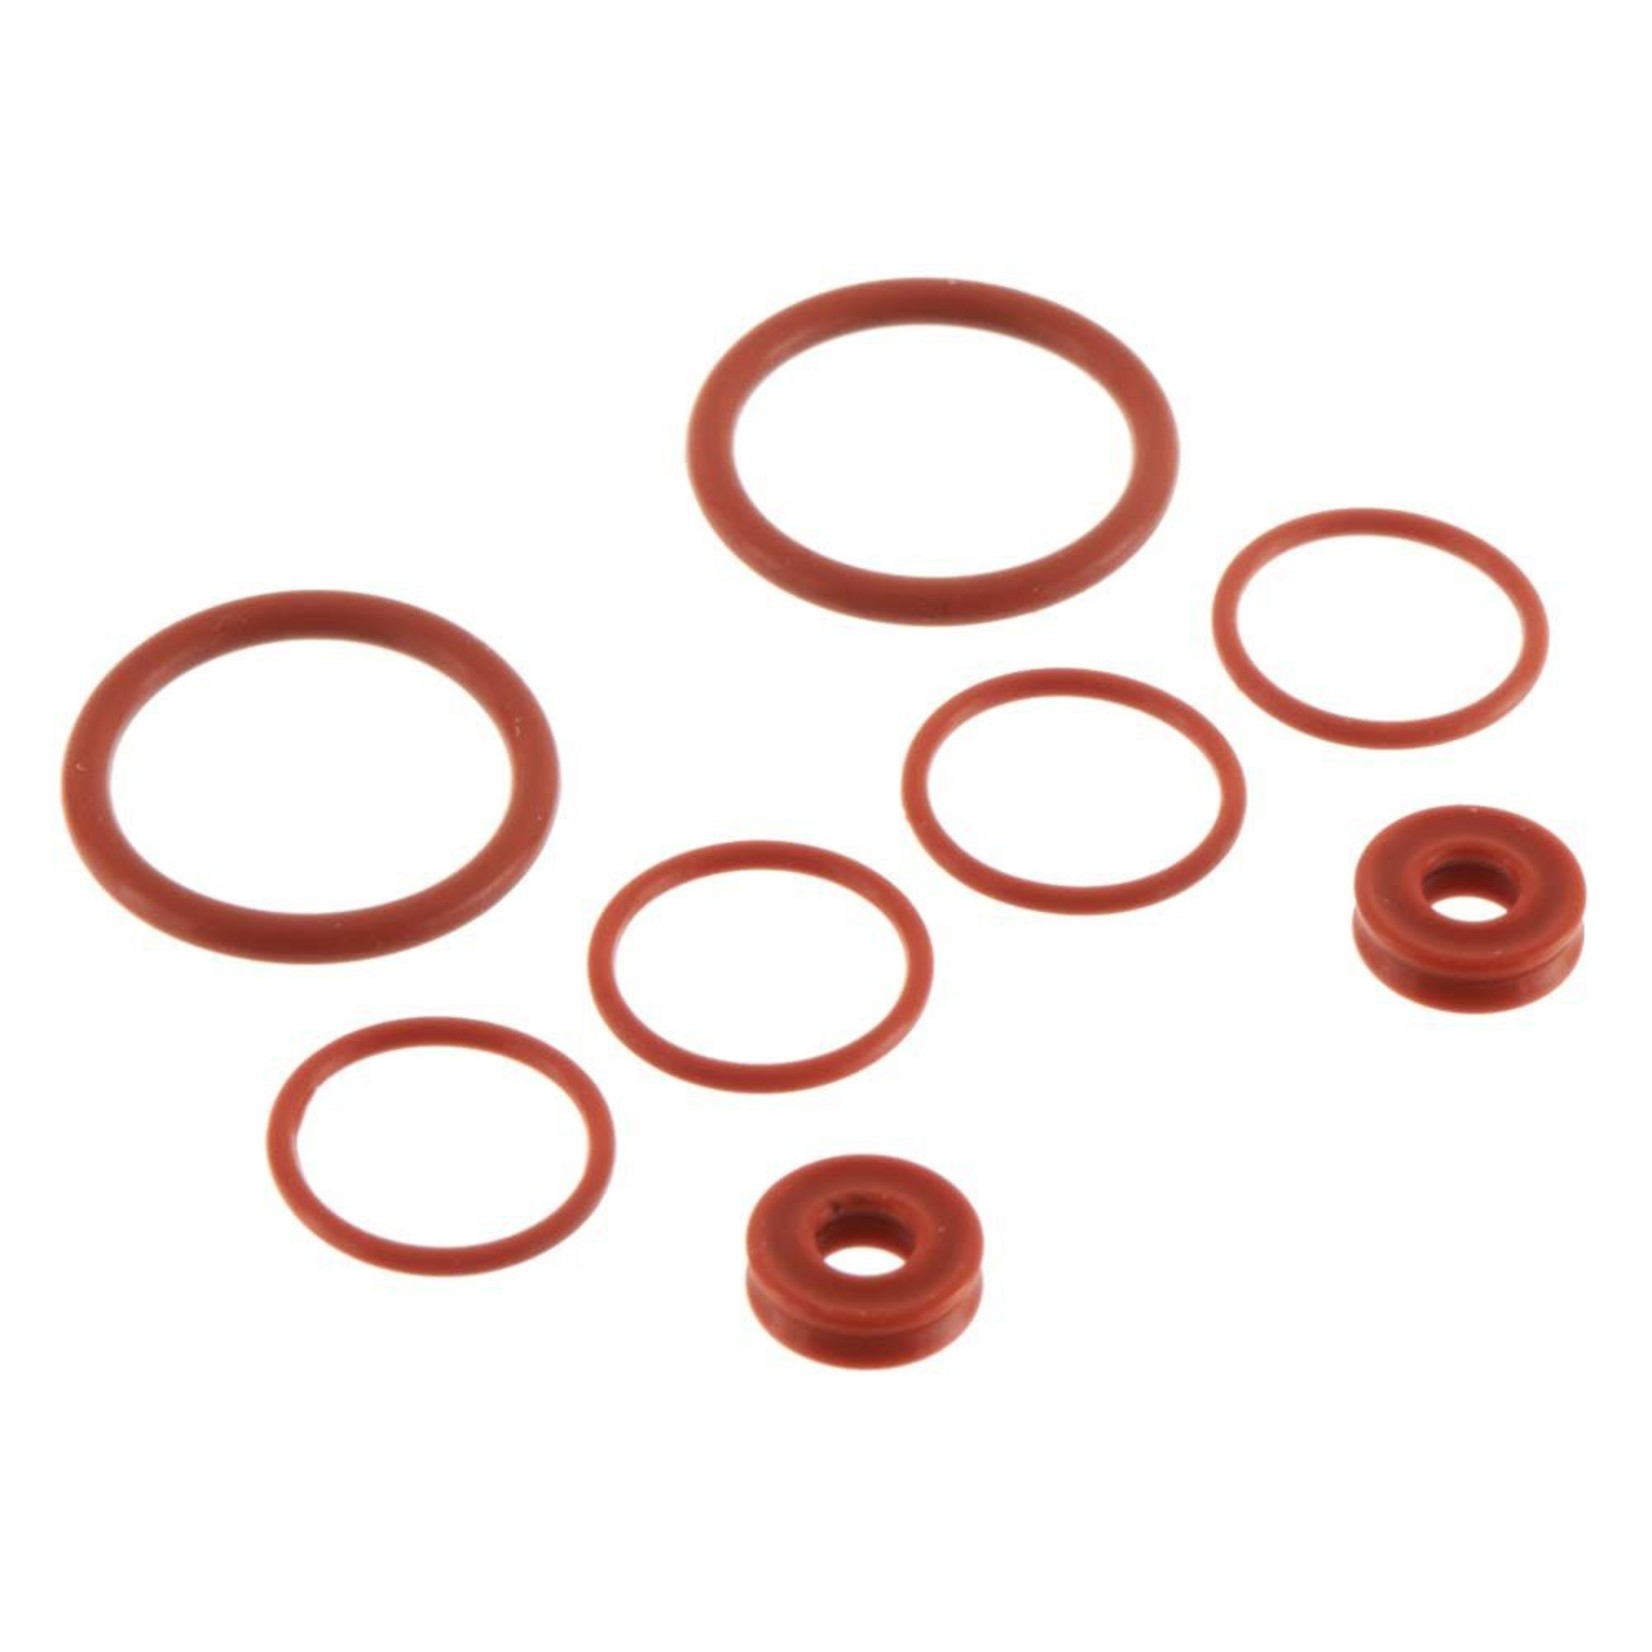 Pro-Line 1/10 Pro-Spec Shock O-Ring Replacement Kit